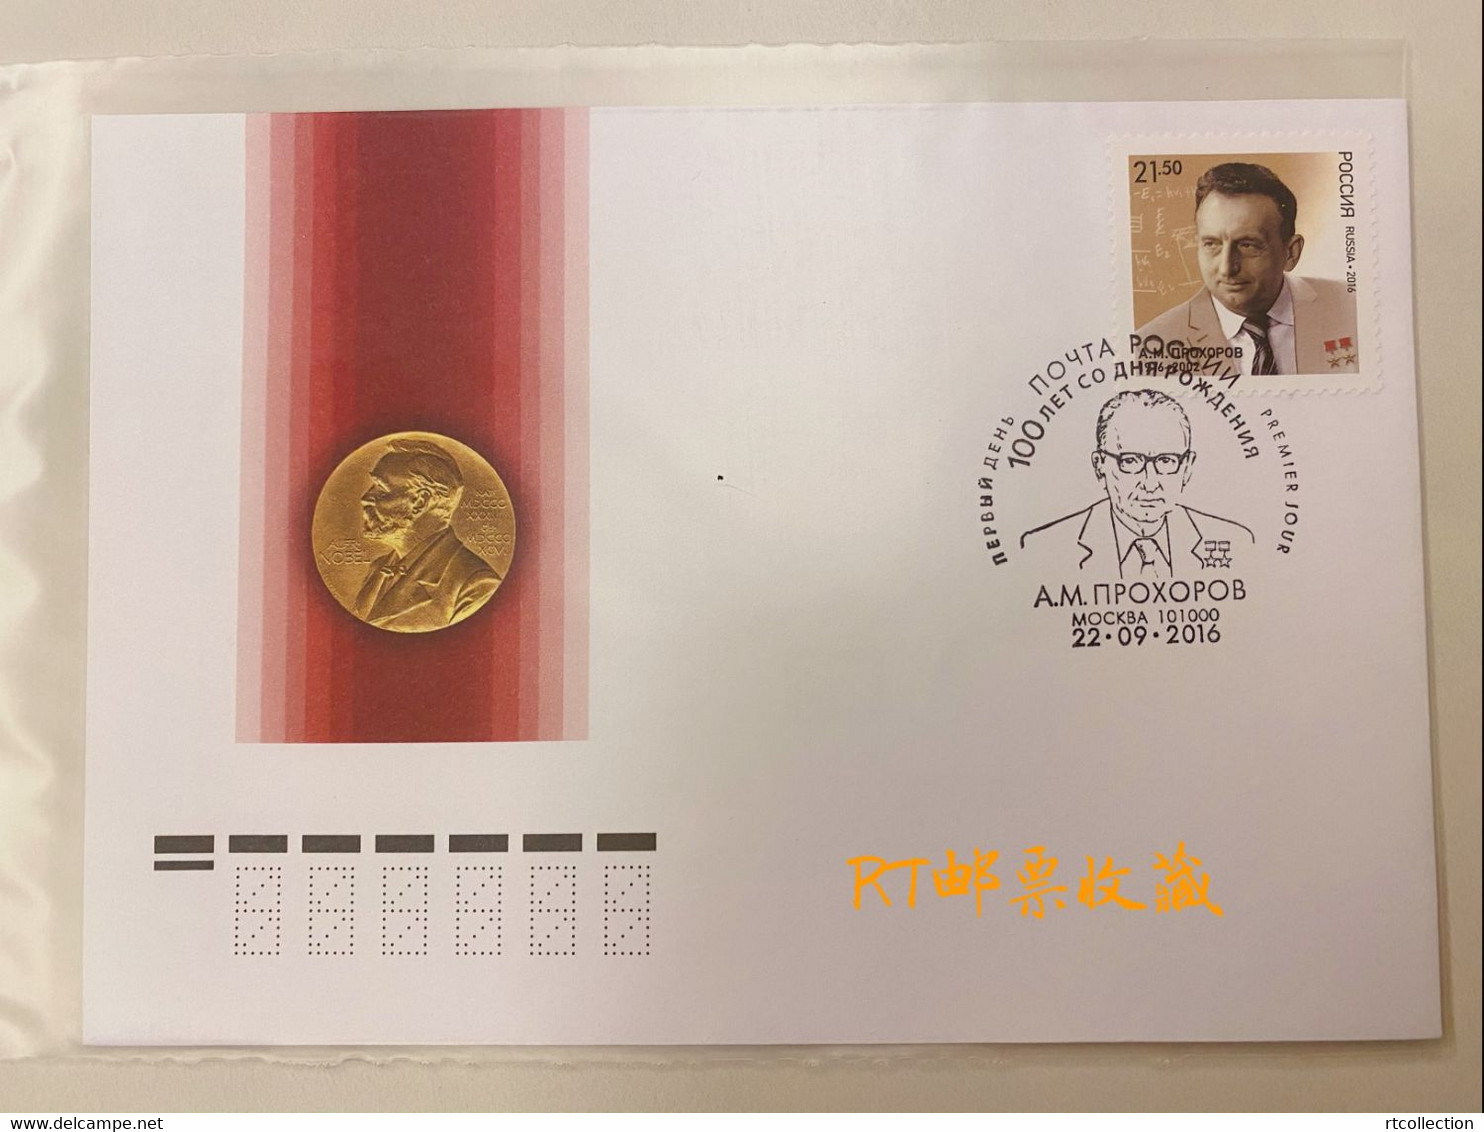 Russia 2016 FDC Scientist Physicist Prokhorov Nobel Prize Winner Laureates Famous People Stamp - FDC